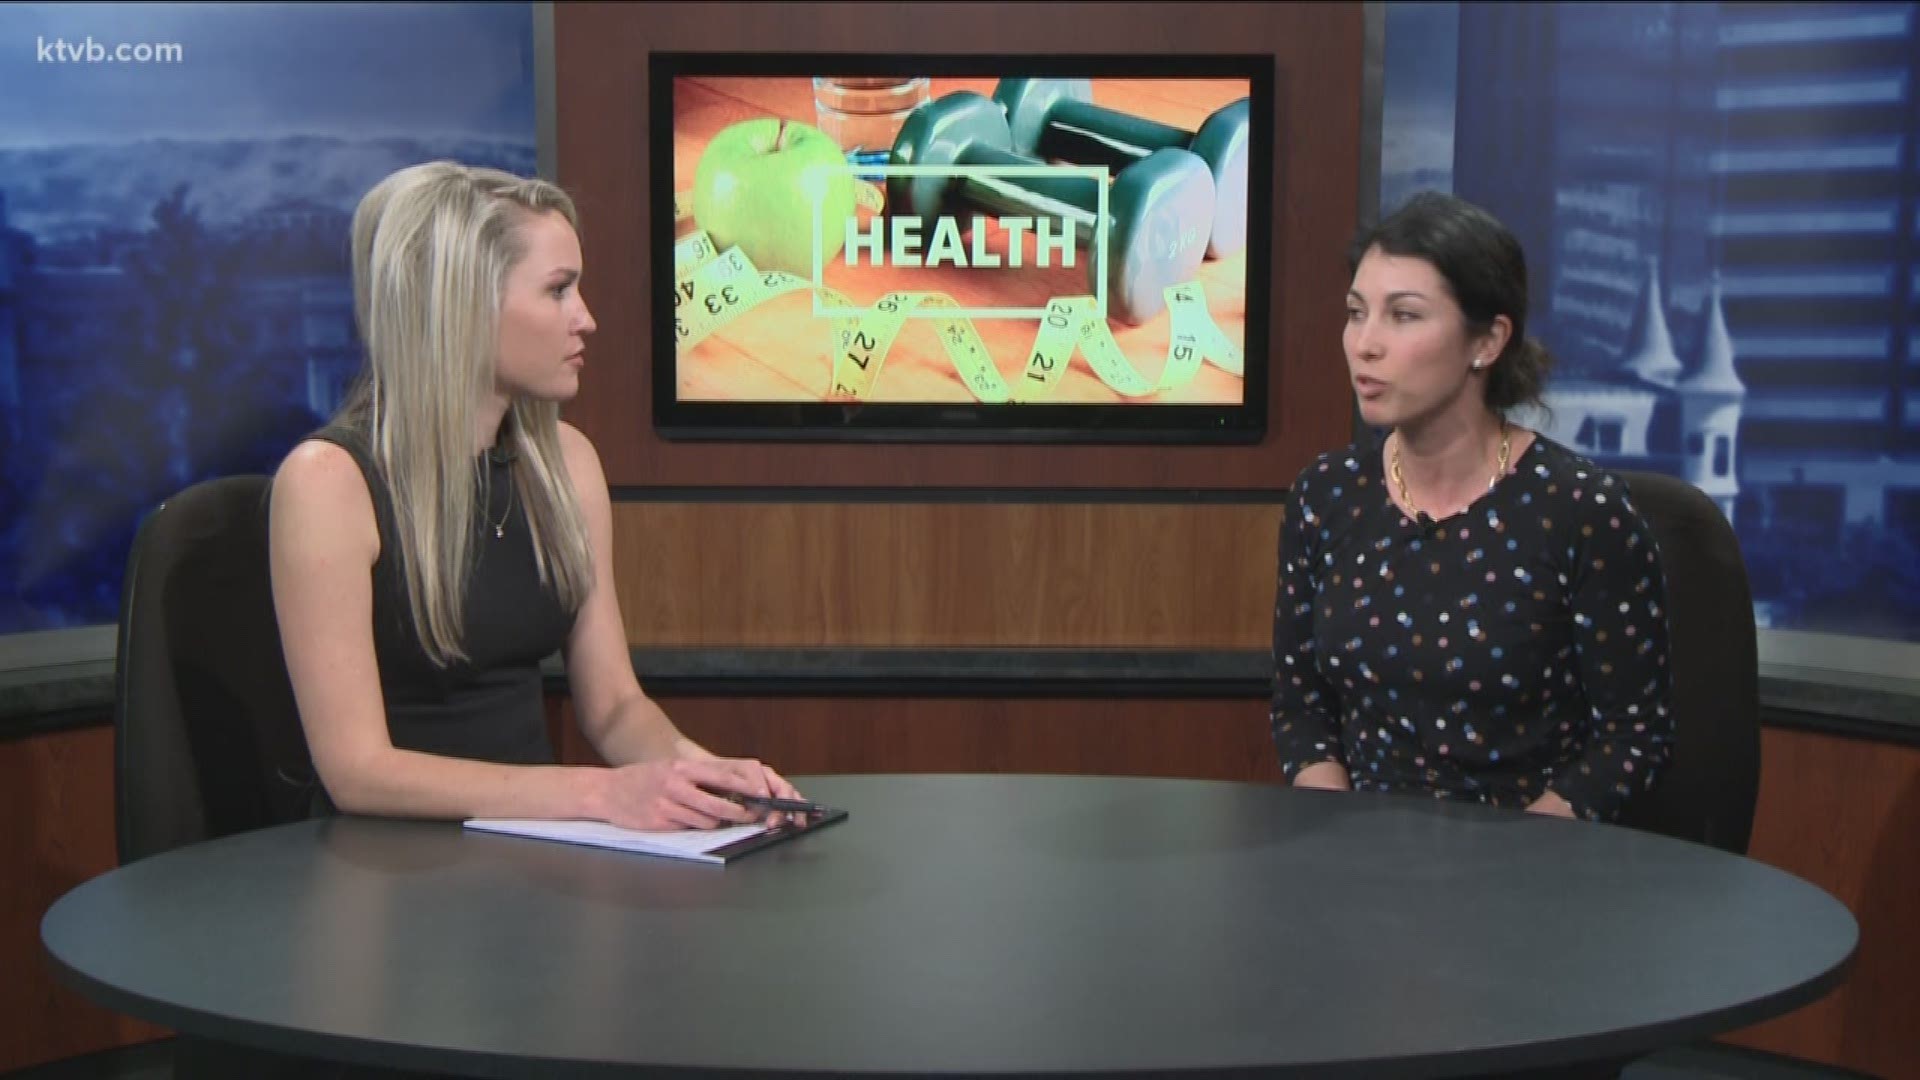 It's called the Mona Lisa laser. Dr. Lisa Parrillo with the Idaho Urologic Institute talked about it on KTVB's News at Noon